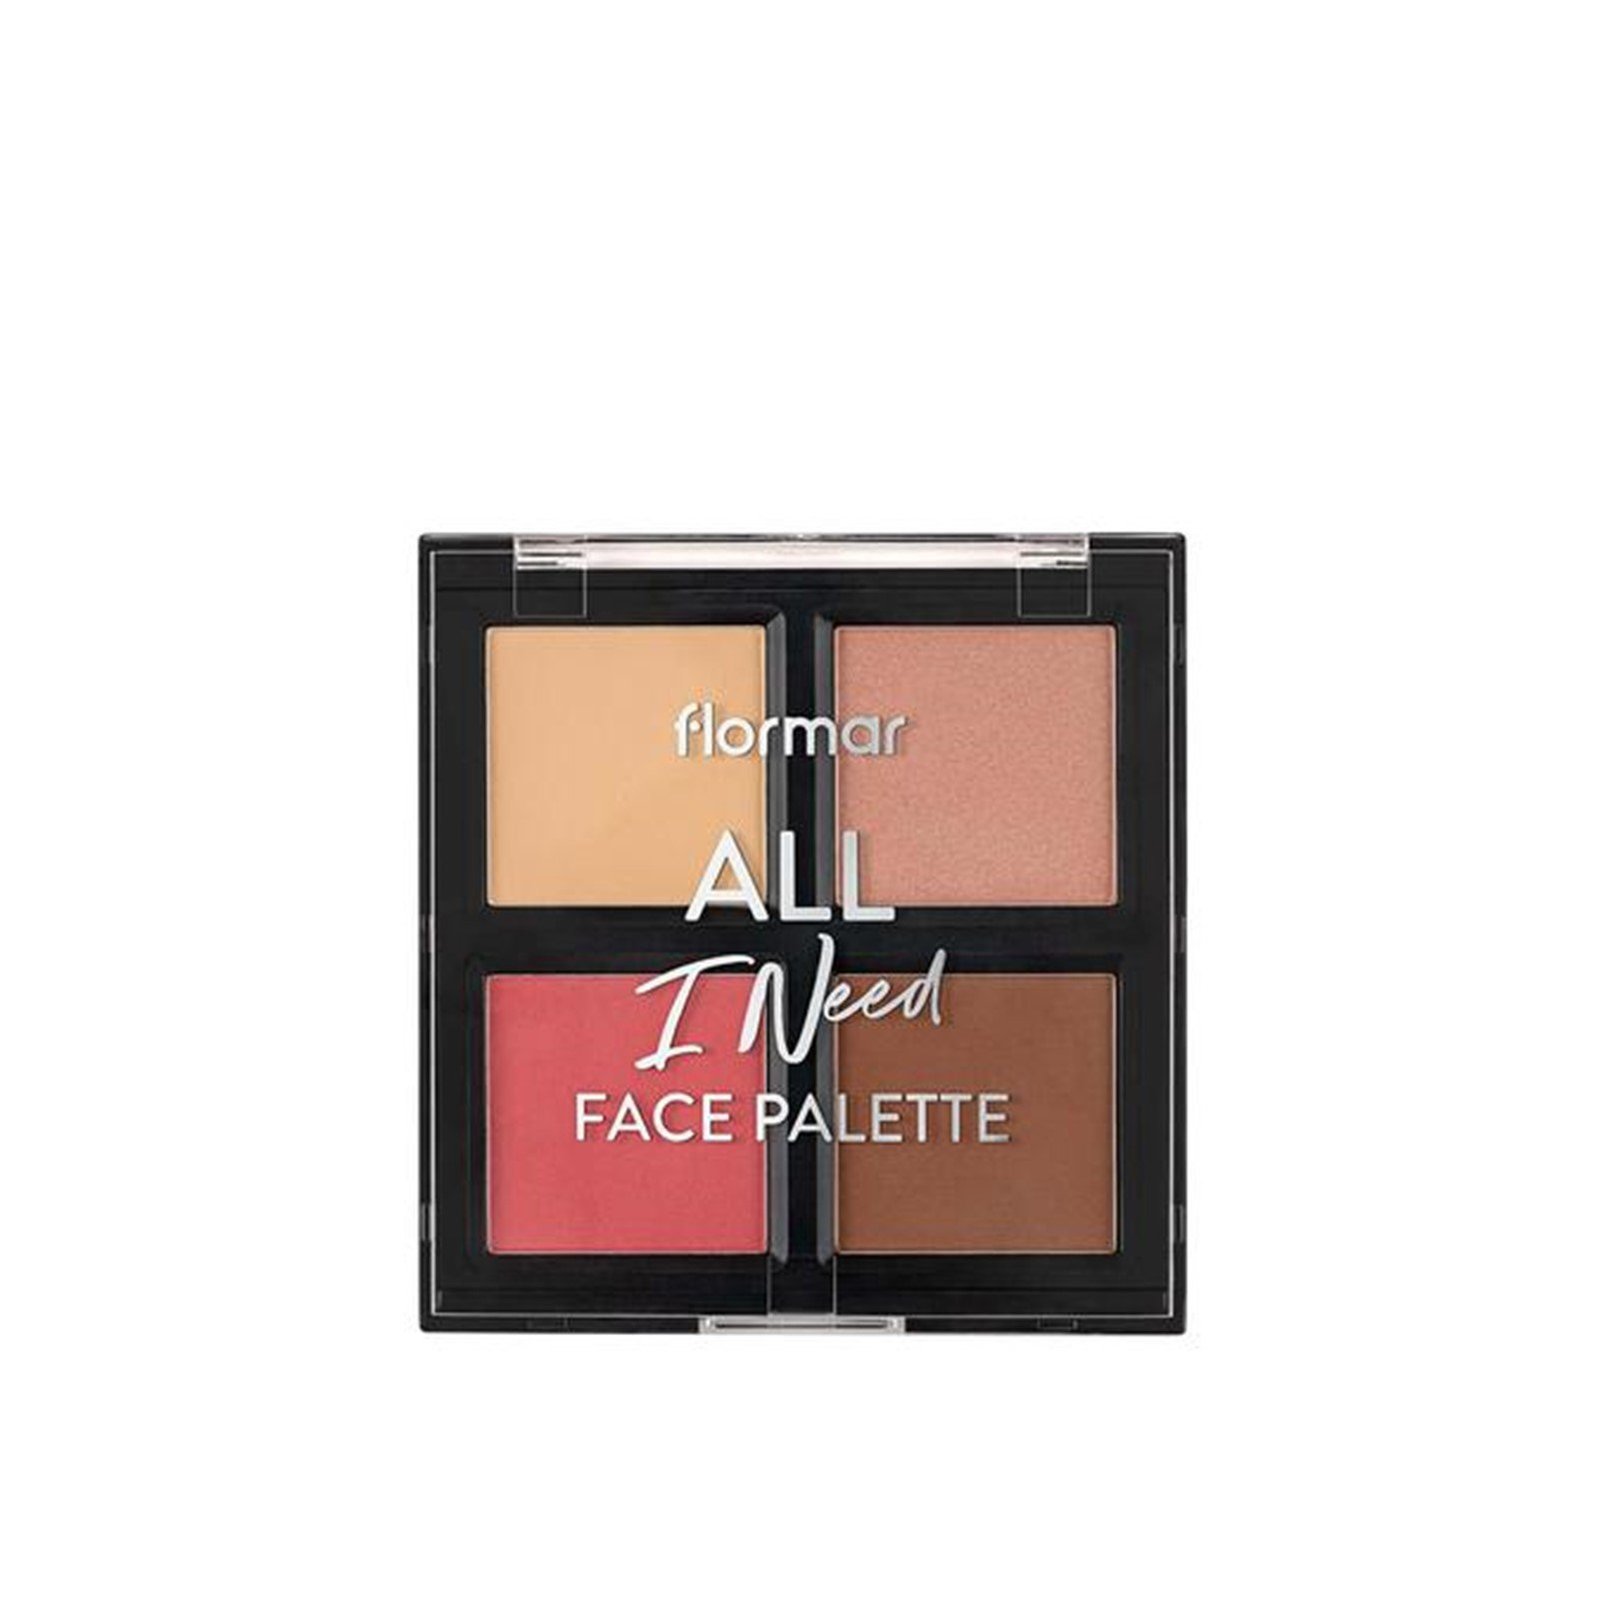 Flormar All I Need Face Palette (4x 0.12 oz)